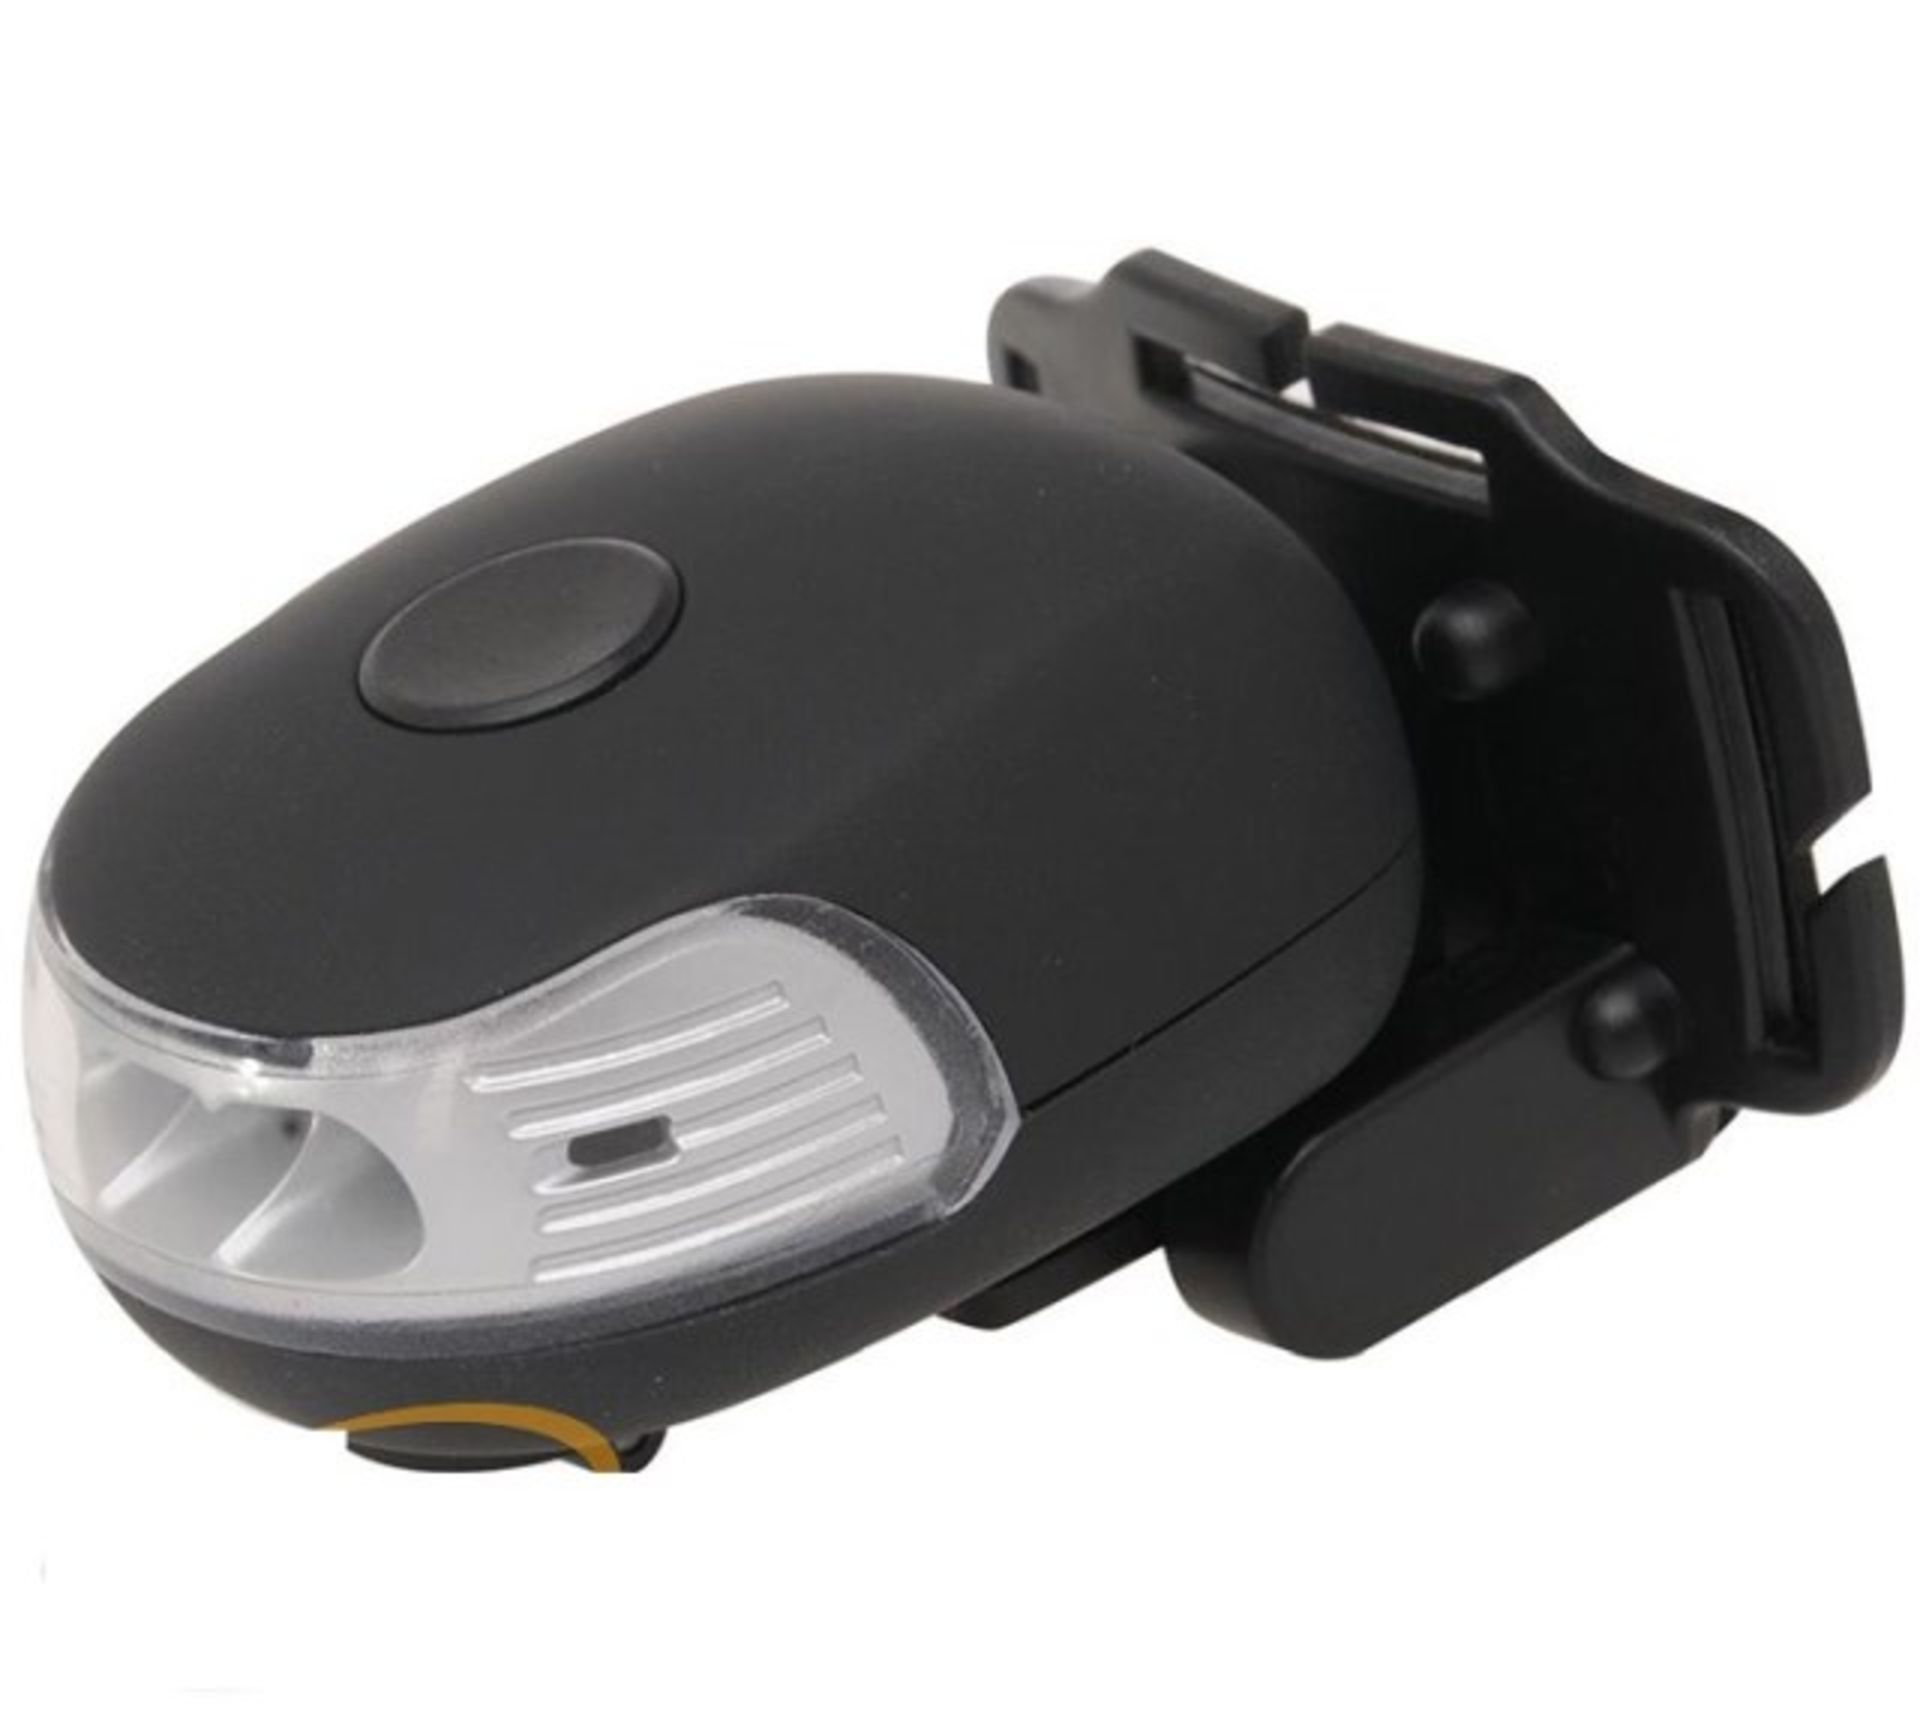 V *TRADE QTY* Brand New Tritronic Optrimax Wind-Up Head Lamp X 6 YOUR BID PRICE TO BE MULTIPLIED